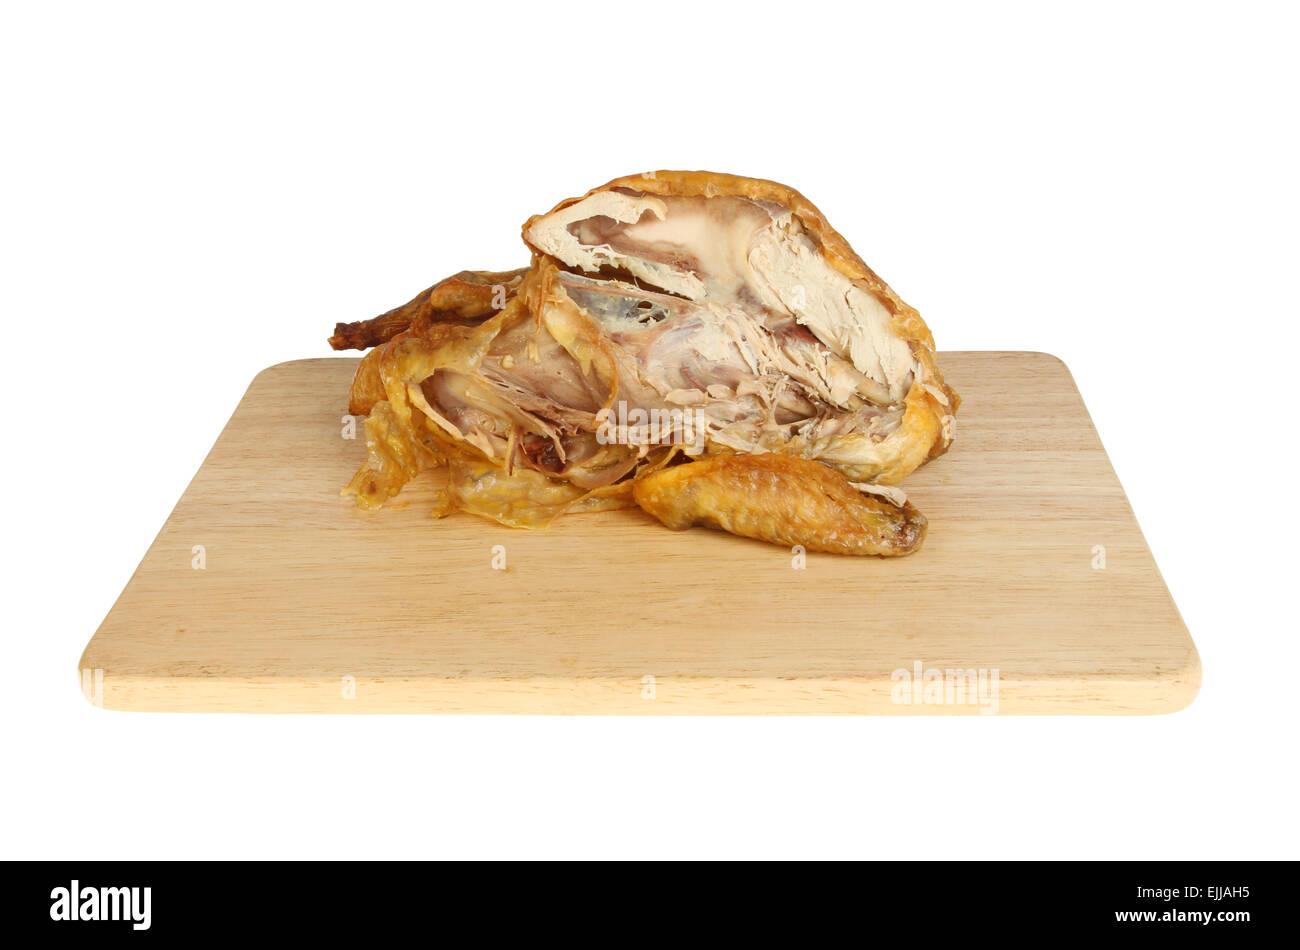 Guinea fowl carcass on a wooden board isolated against white Stock Photo